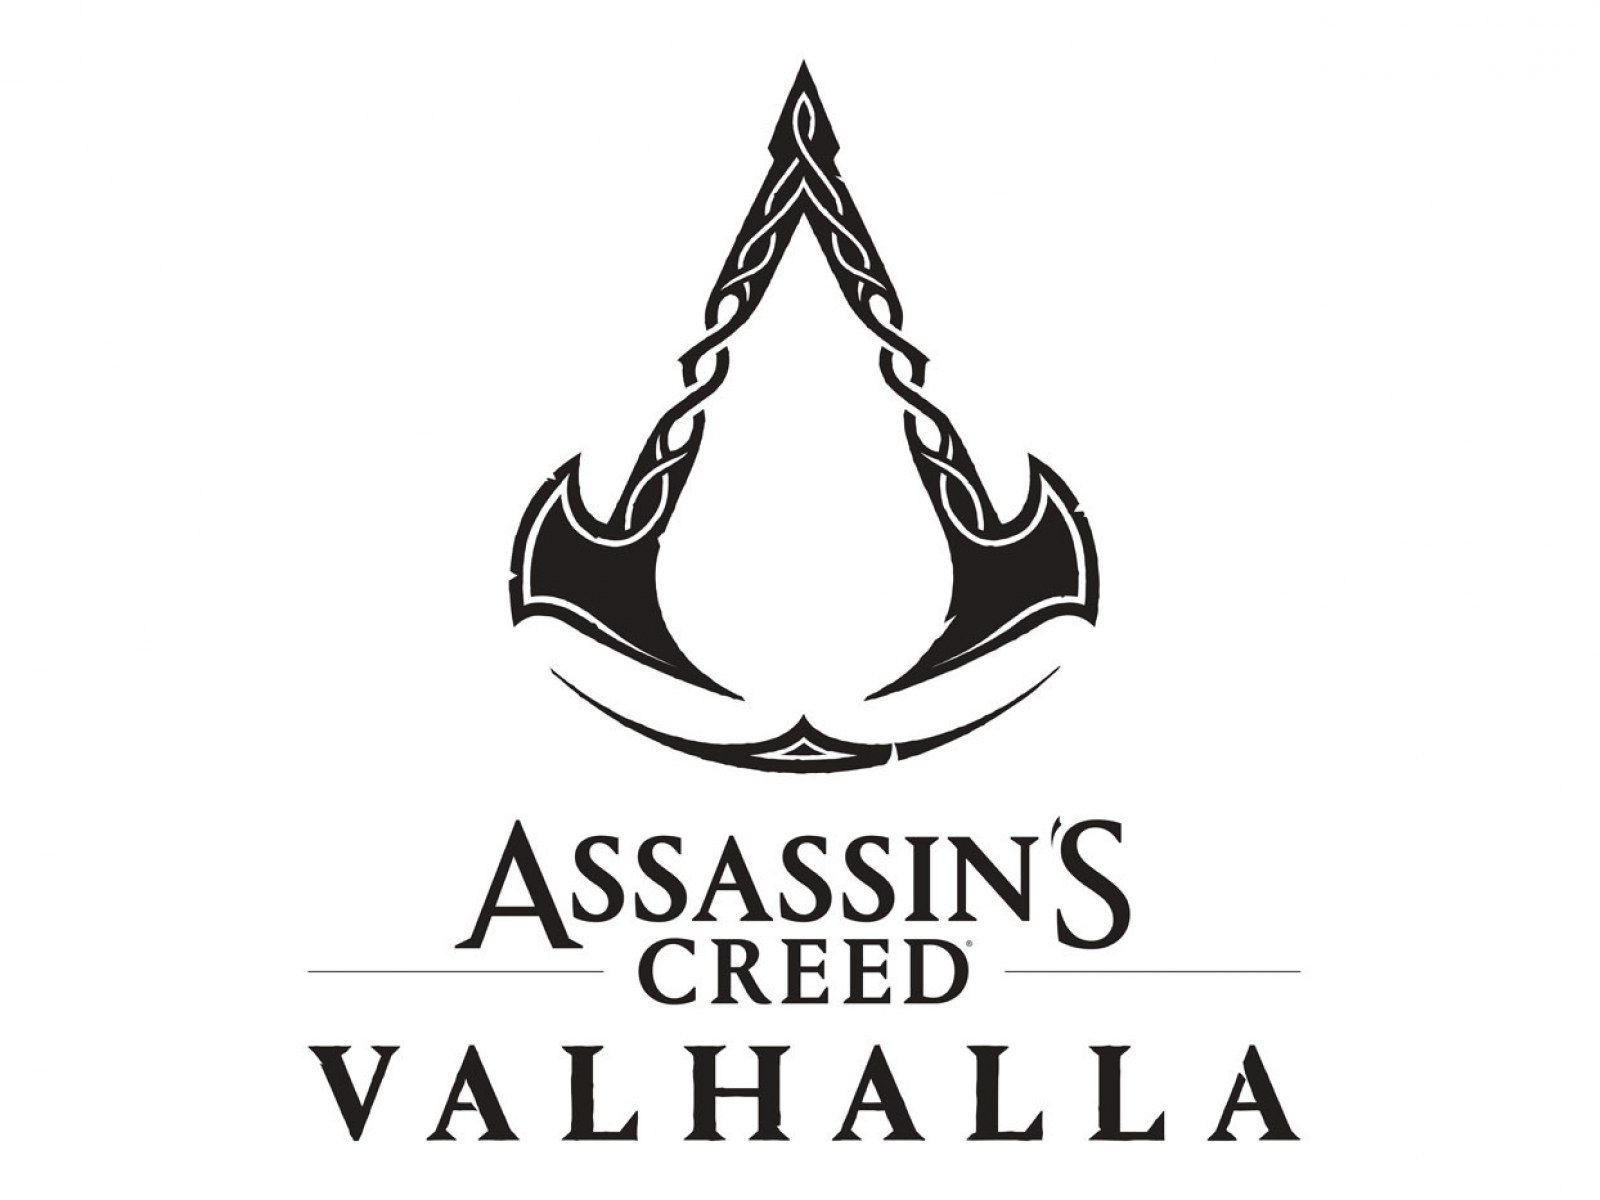 Assassin's Creed Valhalla' Announced, First Drops Thursday